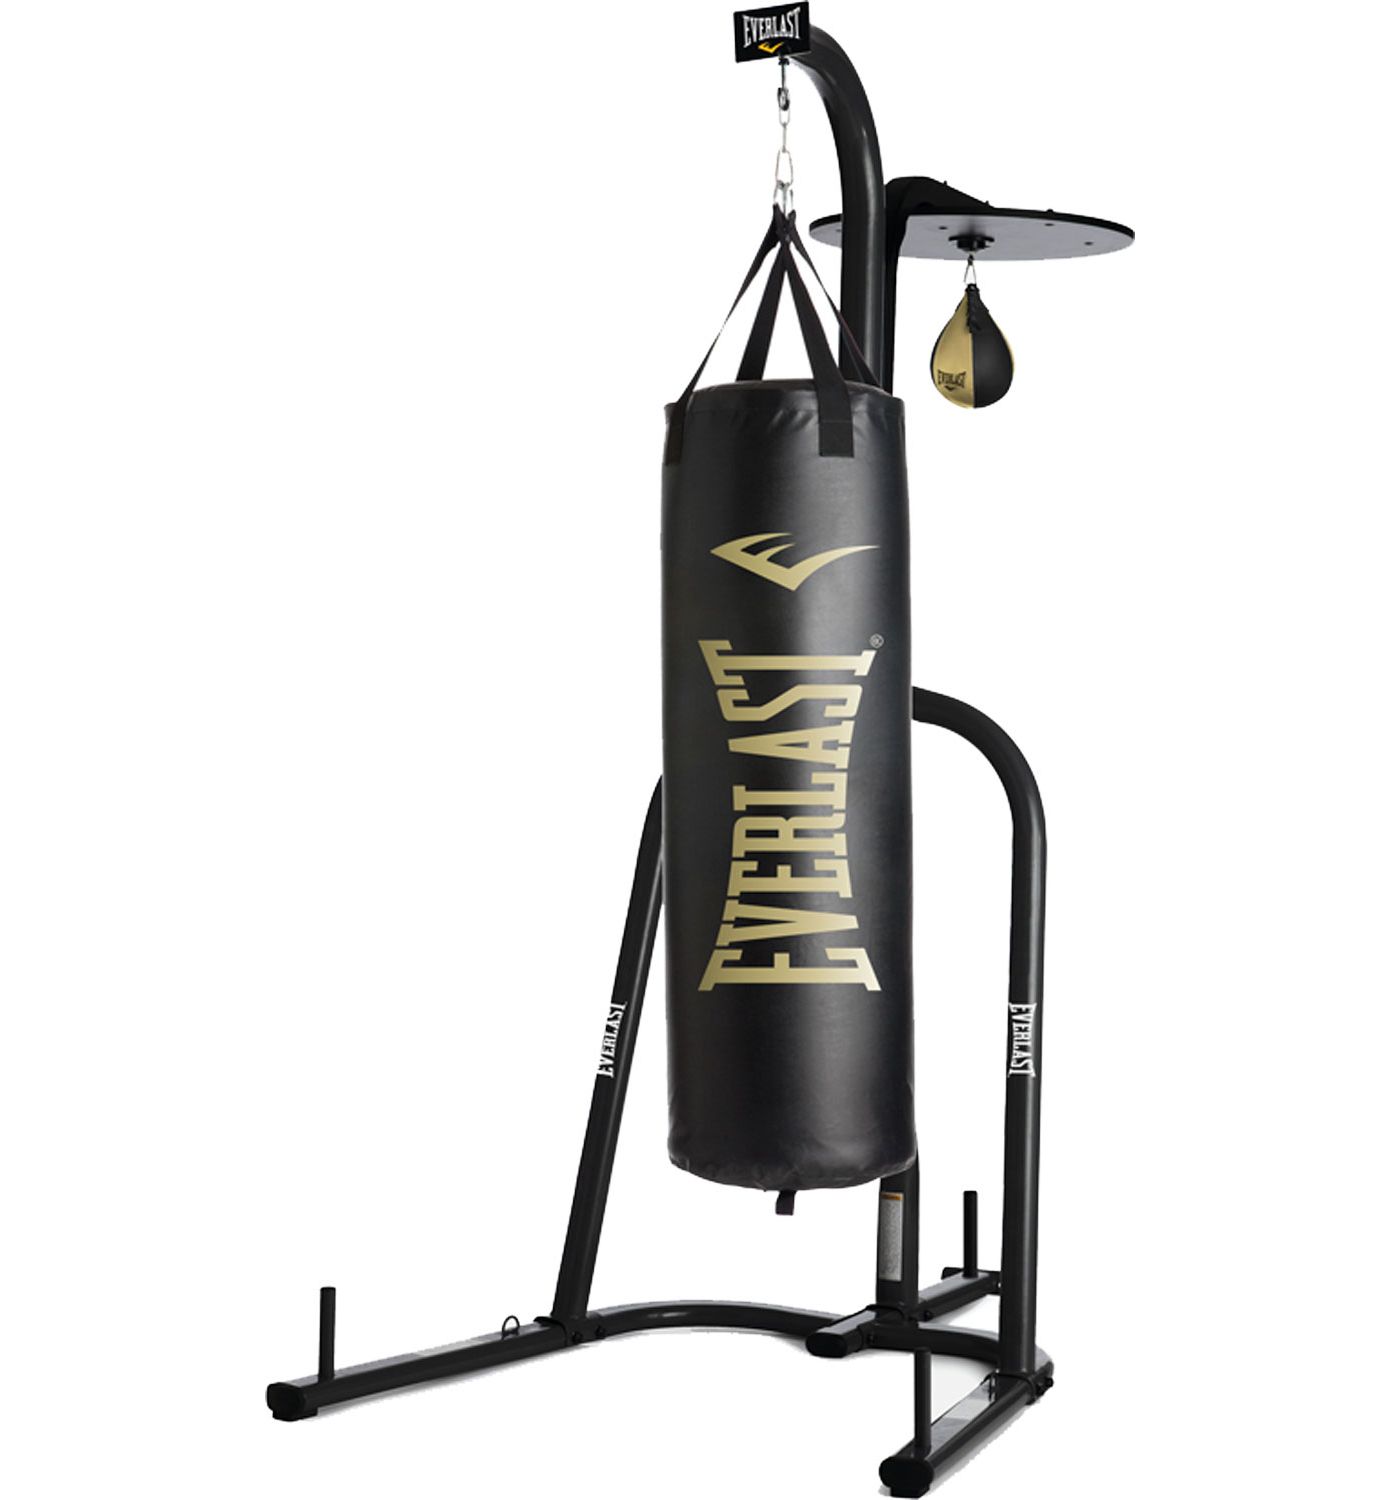 Everlast Punching Bag Stand Price | Literacy Ontario Central South